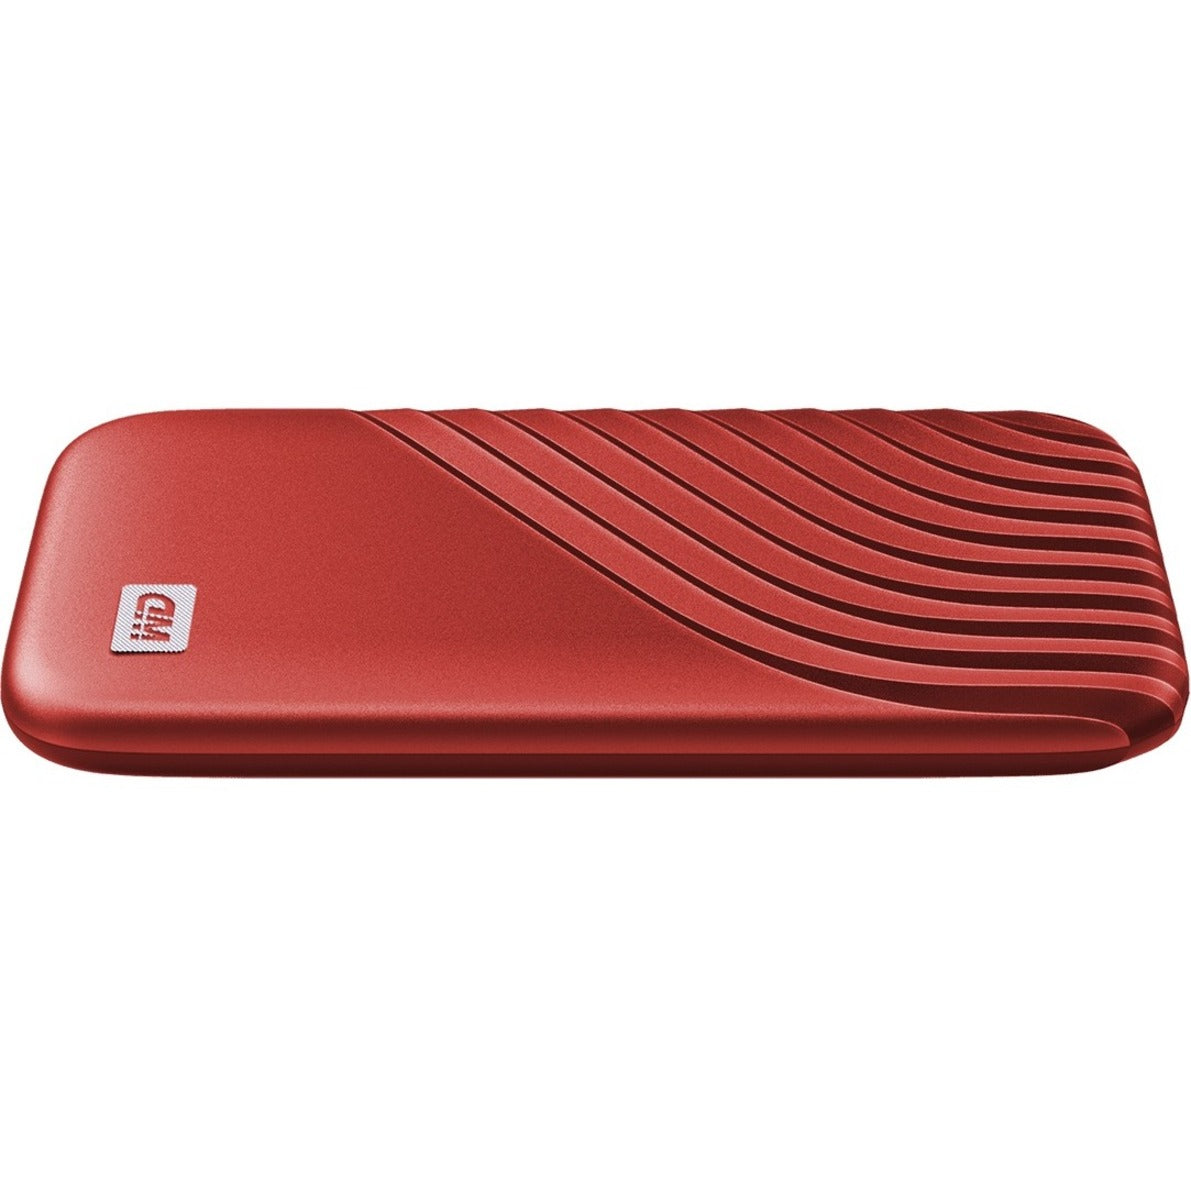 WD WDBAGF0010BRD-WESN My Passport Solid State Drive, 1 TB, USB 3.2 (Gen 2) Type C, Red